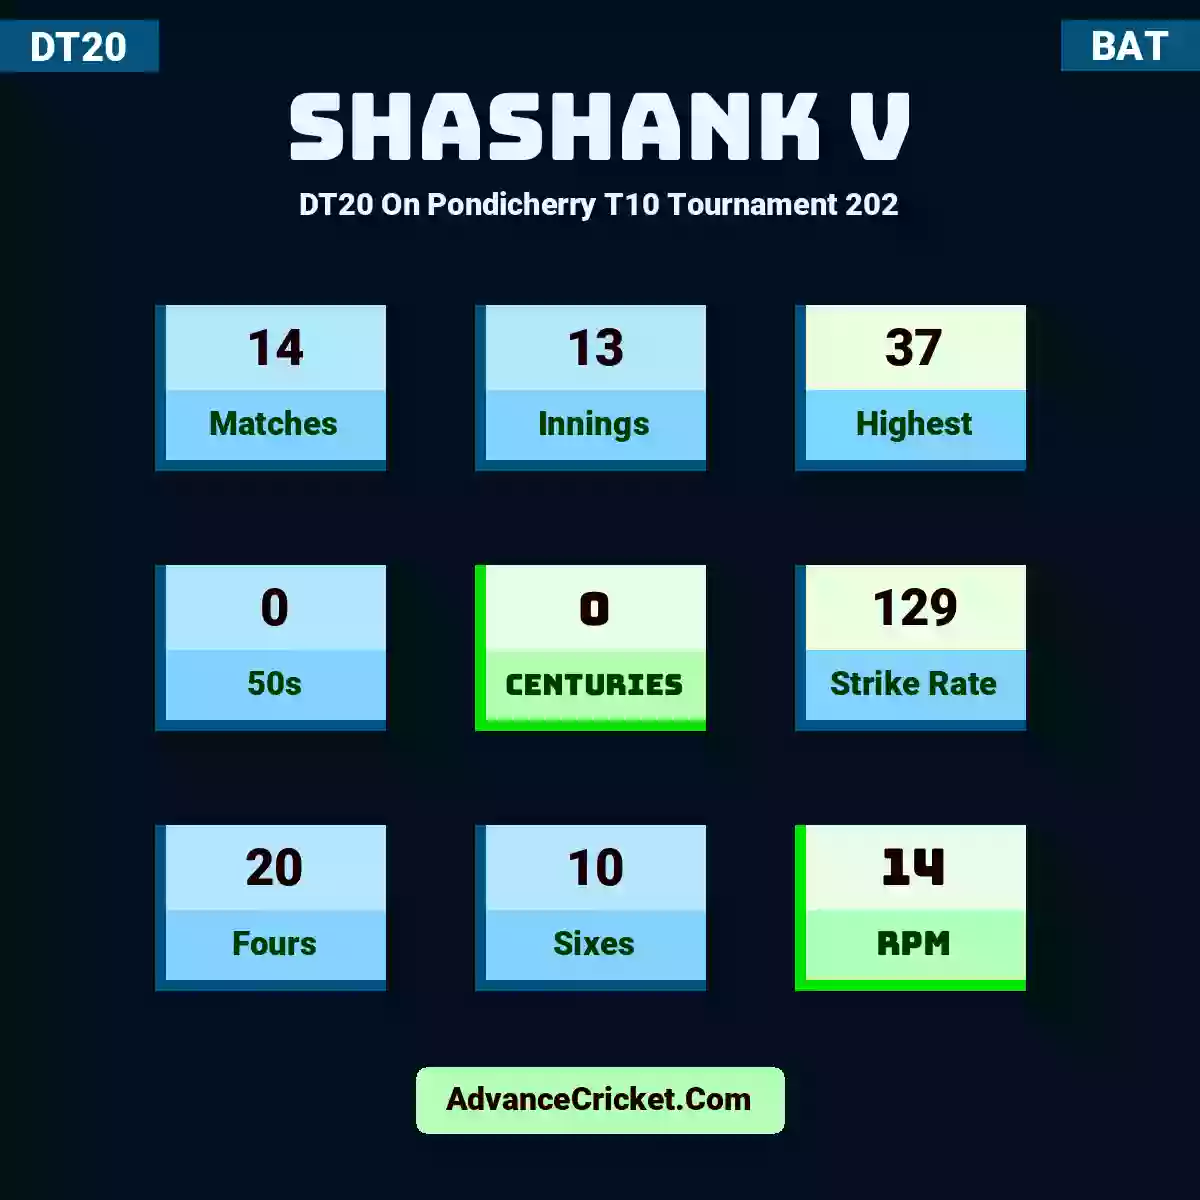 Shashank V DT20  On Pondicherry T10 Tournament 202, Shashank V played 14 matches, scored 37 runs as highest, 0 half-centuries, and 0 centuries, with a strike rate of 129. S.V hit 20 fours and 10 sixes, with an RPM of 14.